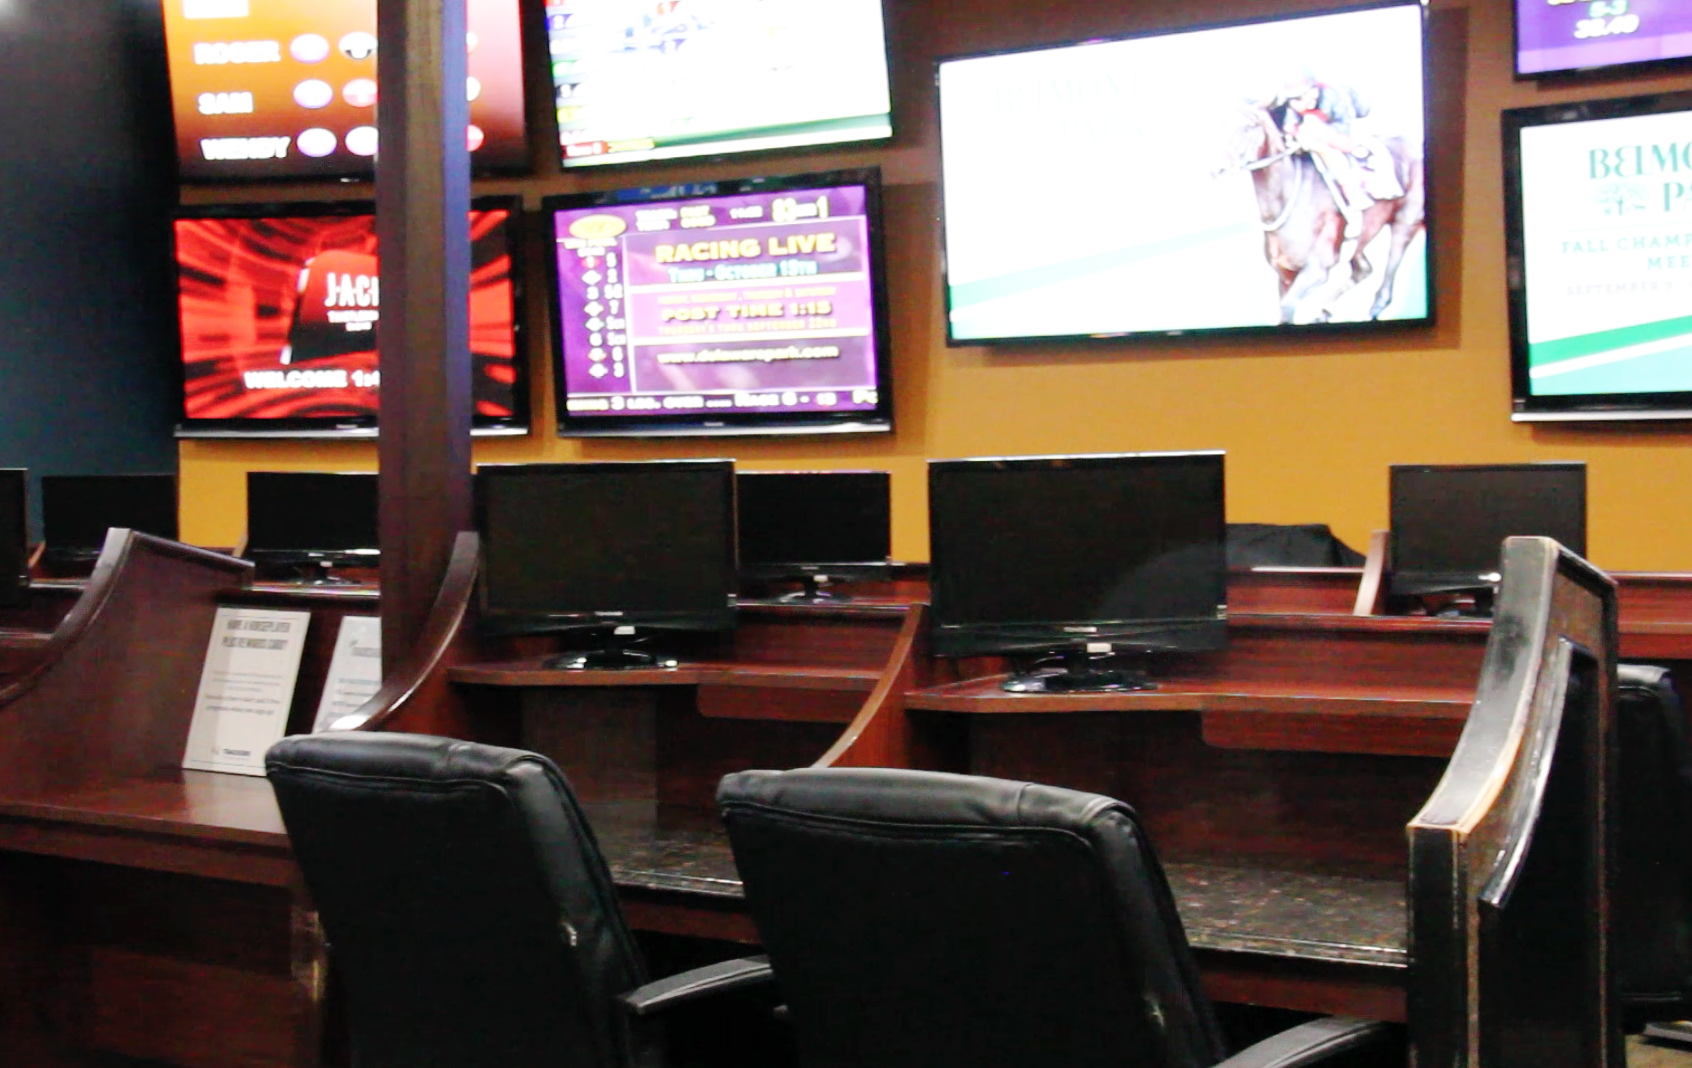 Off track betting in rockford illinois browns bengals betting line